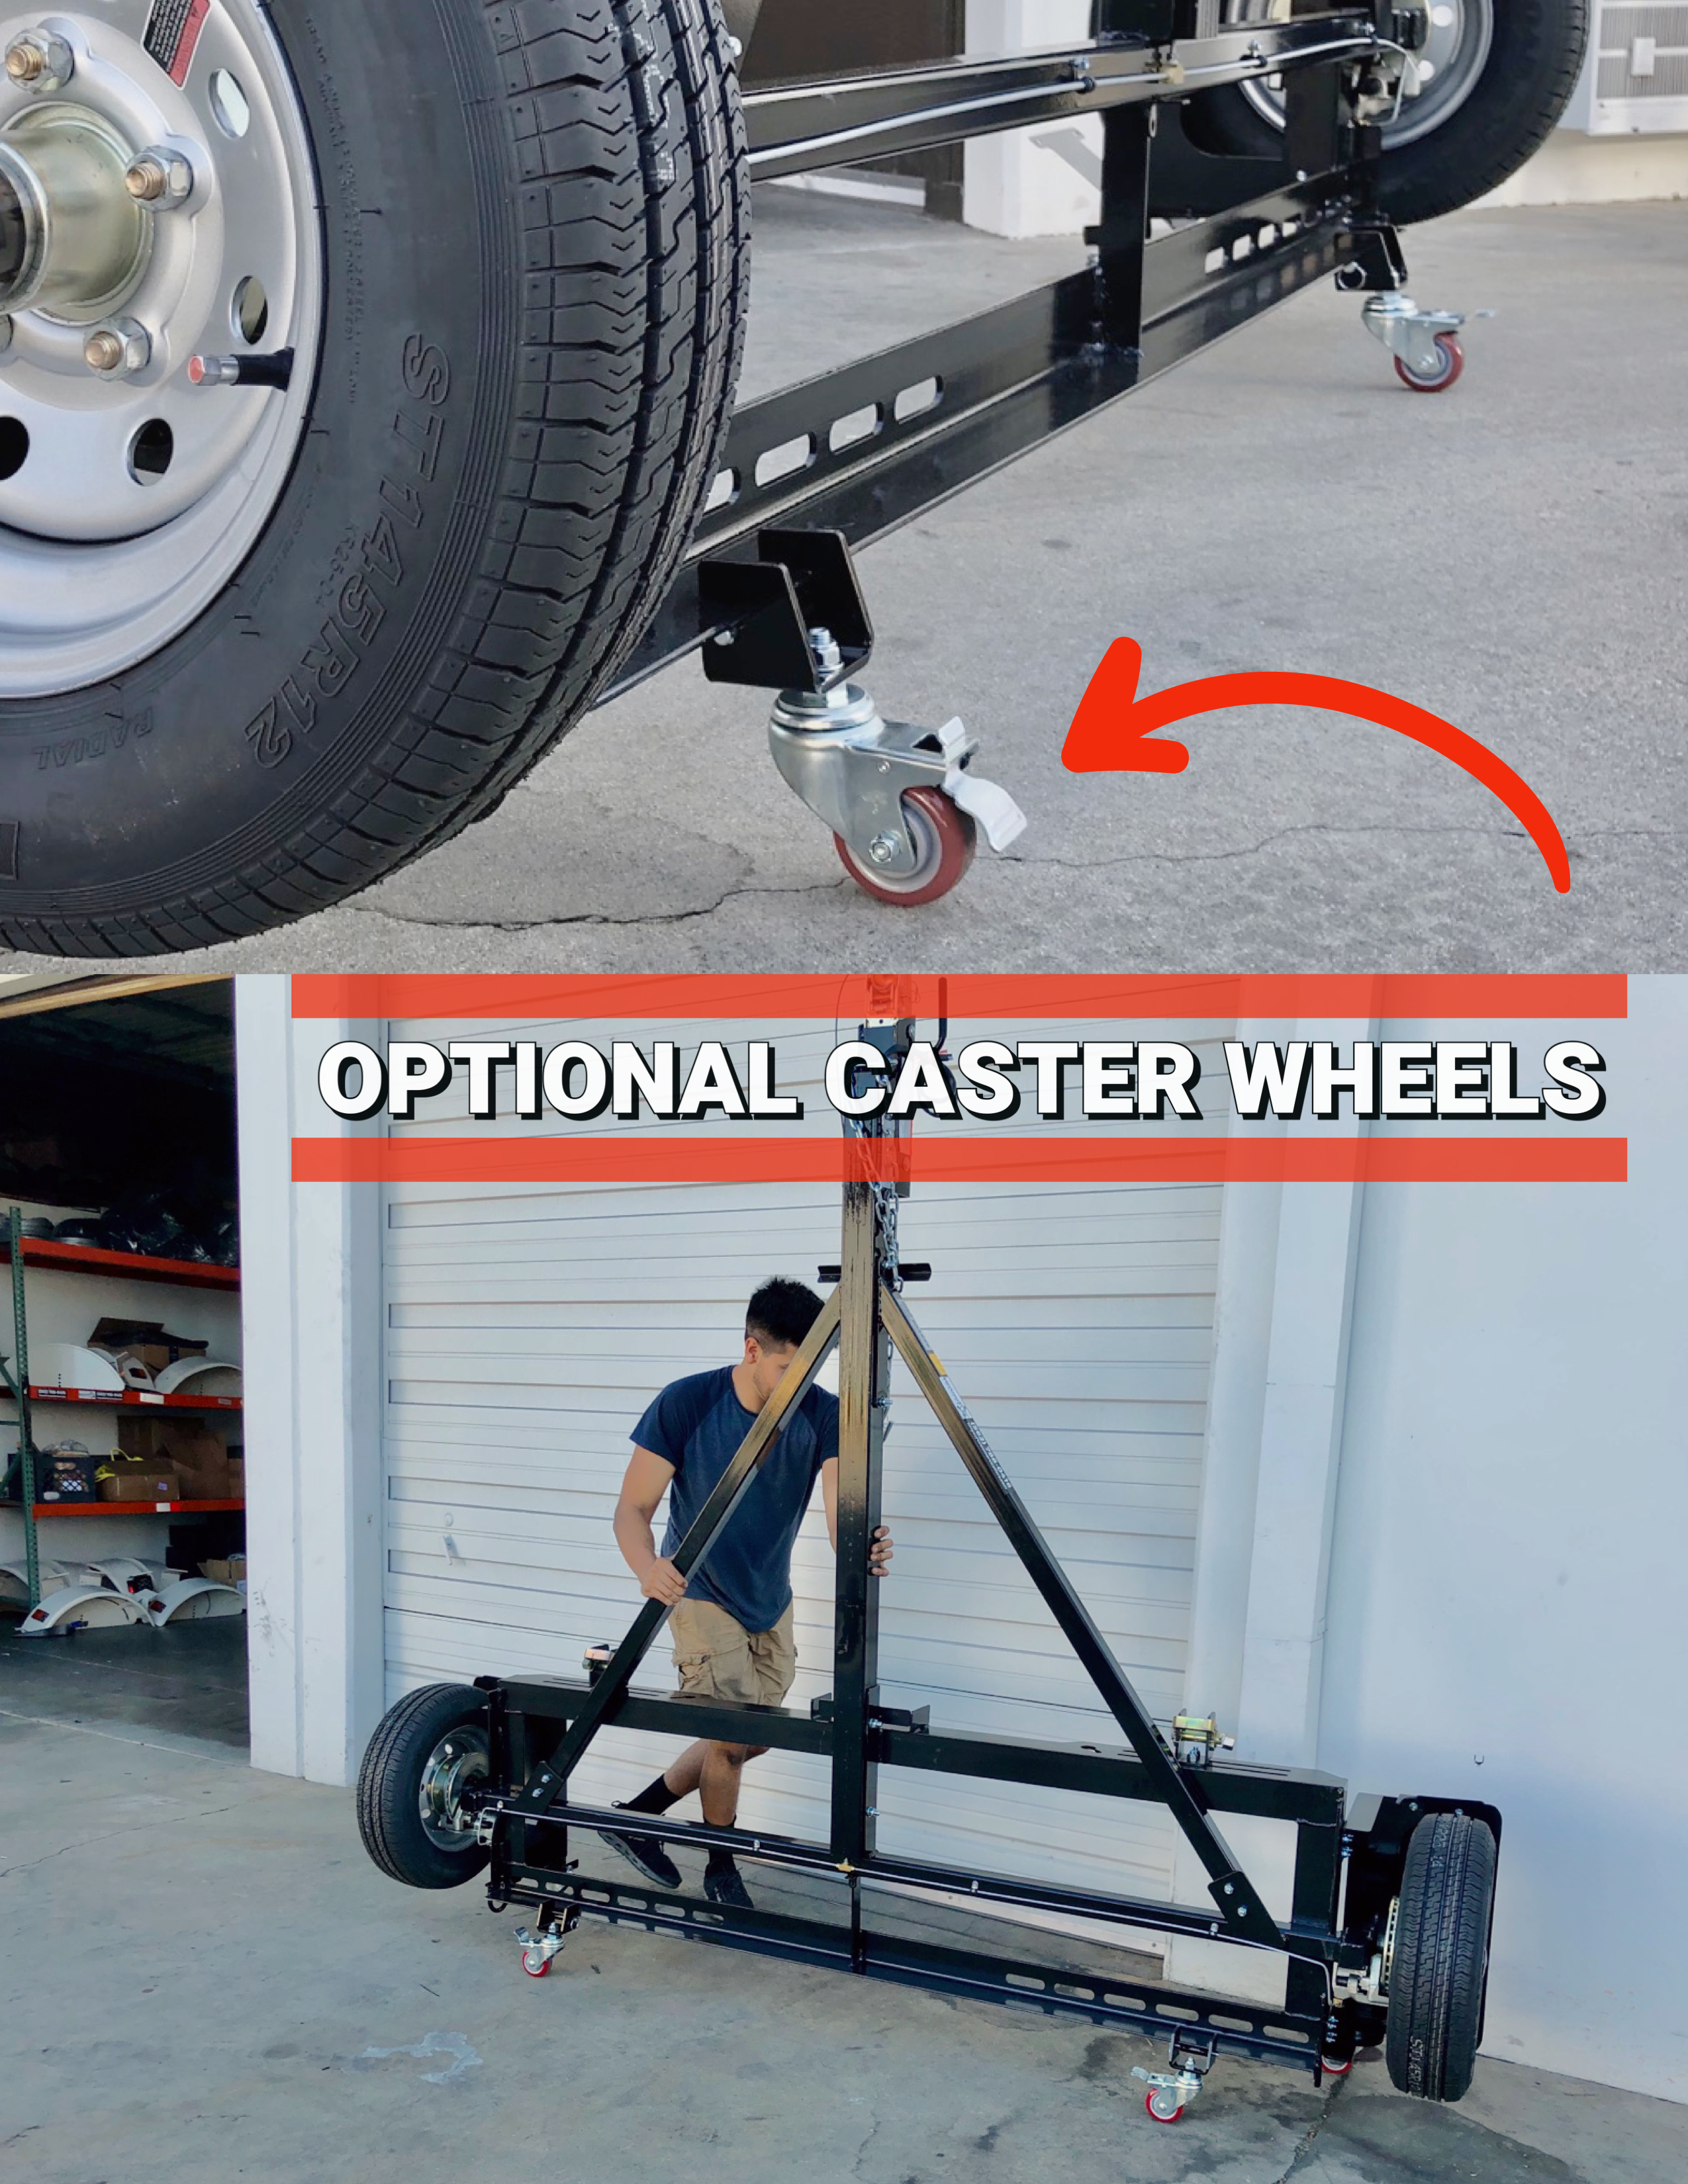 "Built to last and backed by a lifetime warranty, this stand-up car dolly is proudly made in the USA and offers superior performance and reliability for all your automotive needs."